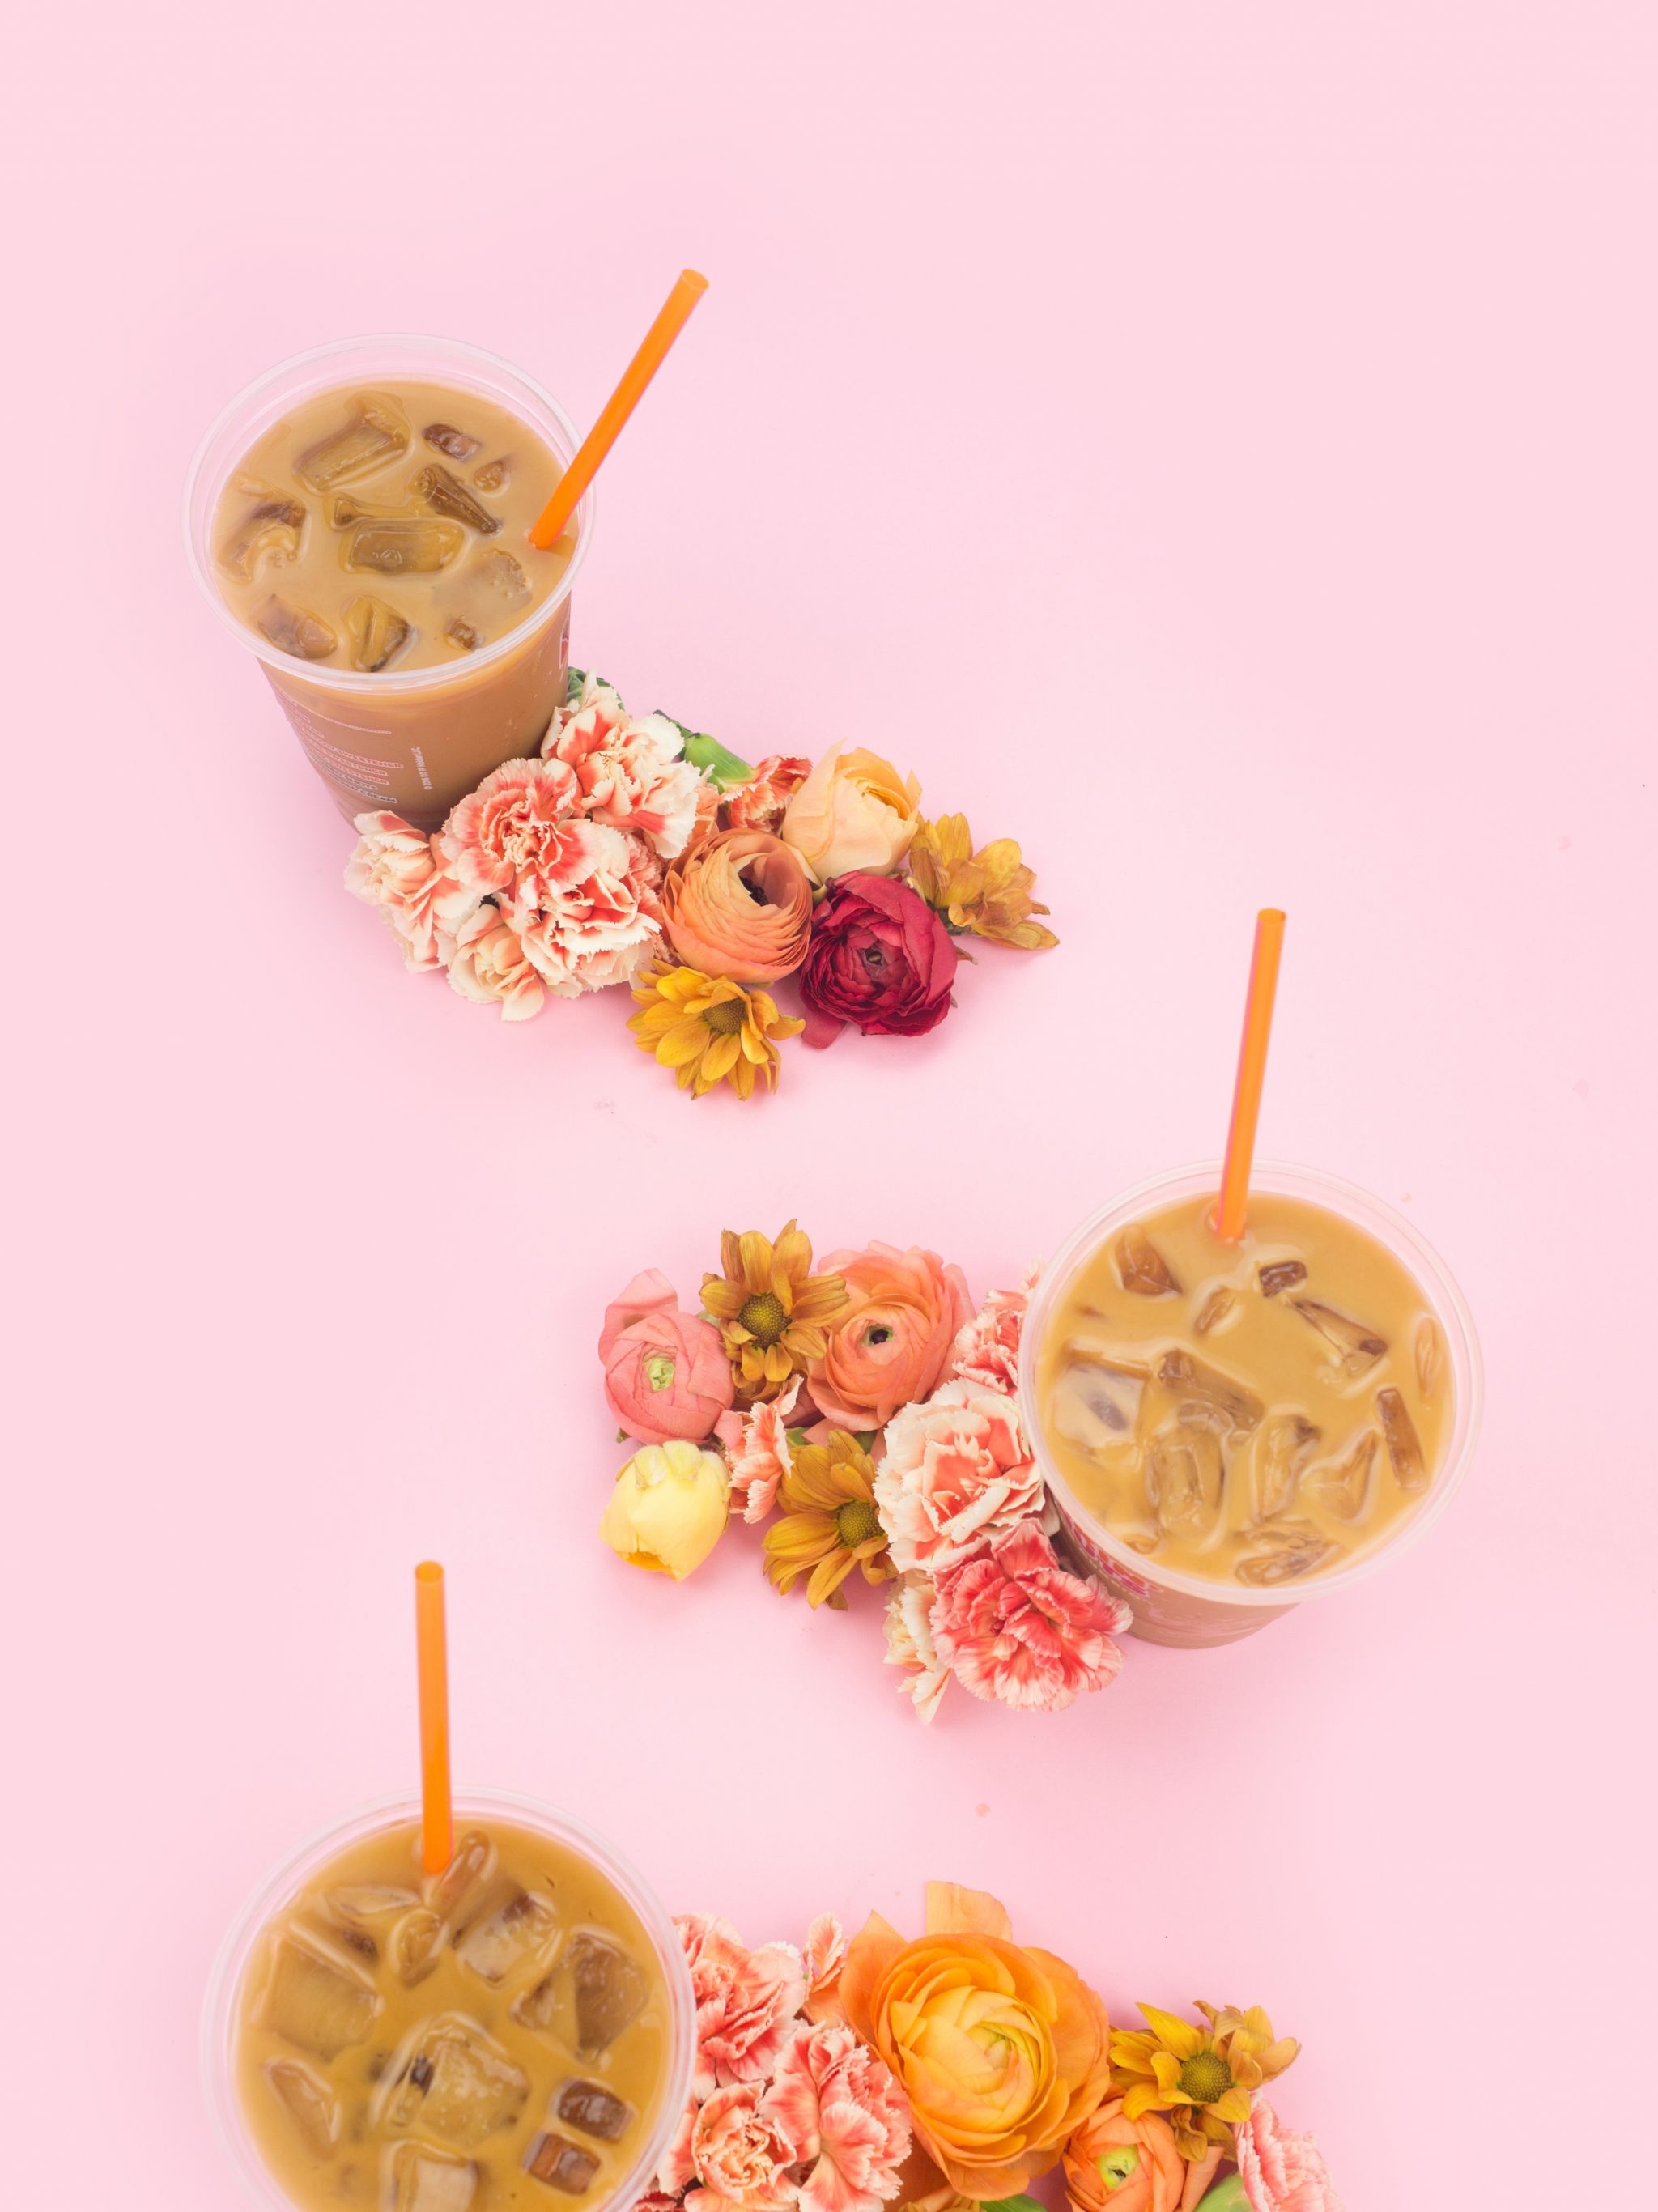 Free download Celebrating Iced Coffee Season with New Mobile Wallpaper Dunkin [3046x5418] for your Desktop, Mobile & Tablet. Explore Dunkin' Donuts Wallpaper. Dunkin' Donuts Wallpaper